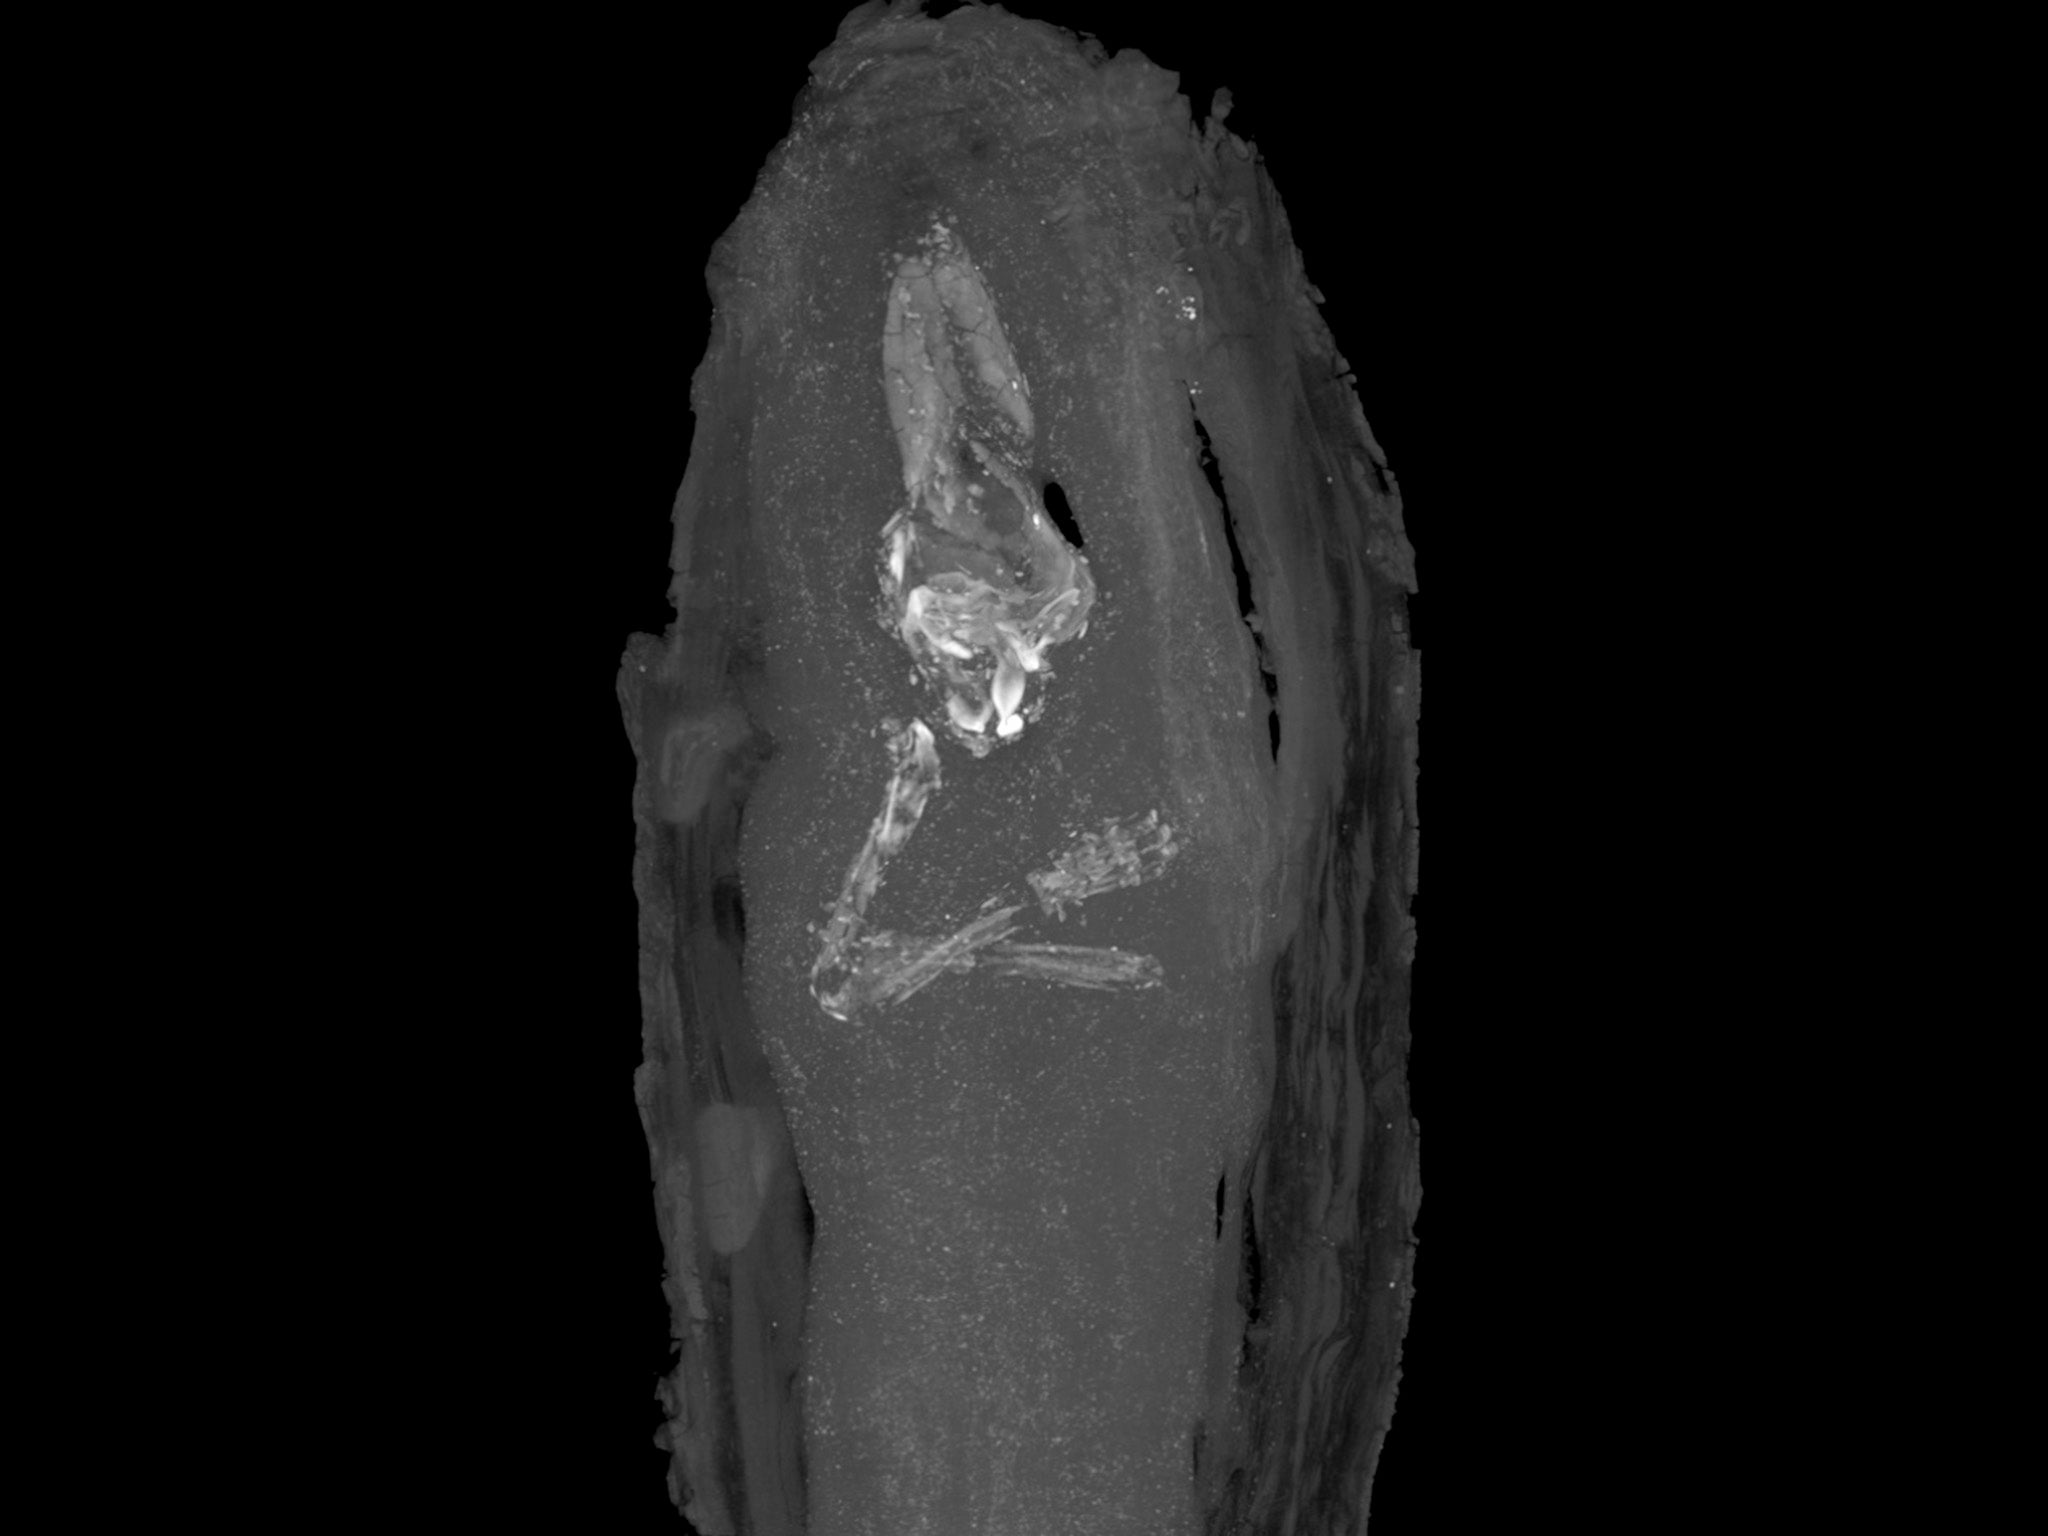 The coffin was scanned to reveal the tiny limbs of the unborn child